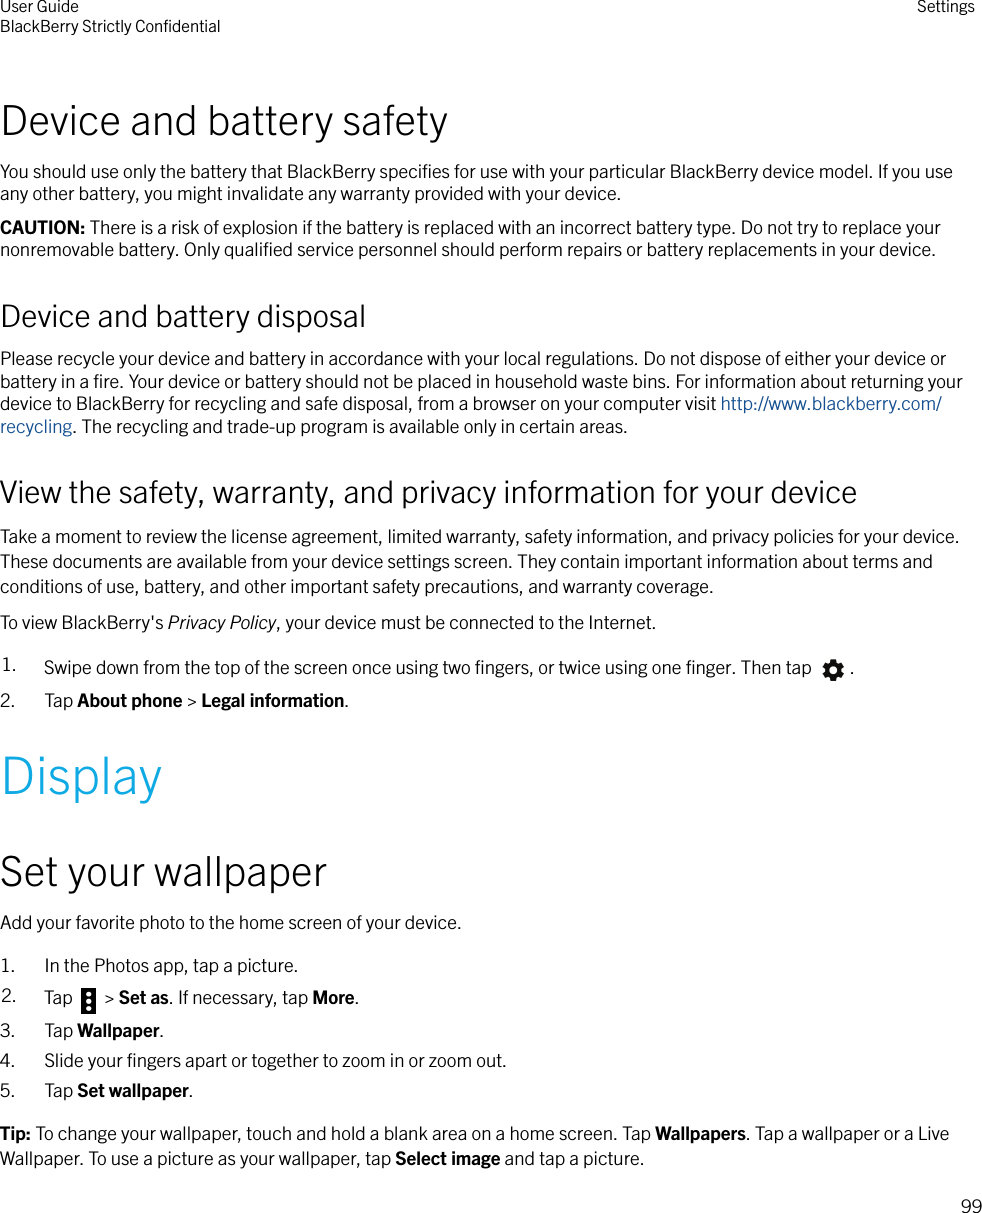 Device and battery safetyYou should use only the battery that BlackBerry speciﬁes for use with your particular BlackBerry device model. If you useany other battery, you might invalidate any warranty provided with your device.CAUTION: There is a risk of explosion if the battery is replaced with an incorrect battery type. Do not try to replace yournonremovable battery. Only qualiﬁed service personnel should perform repairs or battery replacements in your device.Device and battery disposalPlease recycle your device and battery in accordance with your local regulations. Do not dispose of either your device orbattery in a ﬁre. Your device or battery should not be placed in household waste bins. For information about returning yourdevice to BlackBerry for recycling and safe disposal, from a browser on your computer visit http://www.blackberry.com/recycling. The recycling and trade-up program is available only in certain areas.View the safety, warranty, and privacy information for your deviceTake a moment to review the license agreement, limited warranty, safety information, and privacy policies for your device.These documents are available from your device settings screen. They contain important information about terms andconditions of use, battery, and other important safety precautions, and warranty coverage.To view BlackBerry&apos;s Privacy Policy, your device must be connected to the Internet.1. Swipe down from the top of the screen once using two ﬁngers, or twice using one ﬁnger. Then tap  .2. Tap About phone &gt; Legal information.DisplaySet your wallpaperAdd your favorite photo to the home screen of your device.1. In the Photos app, tap a picture.2. Tap   &gt; Set as. If necessary, tap More.3. Tap Wallpaper.4. Slide your ﬁngers apart or together to zoom in or zoom out.5. Tap Set wallpaper.Tip: To change your wallpaper, touch and hold a blank area on a home screen. Tap Wallpapers. Tap a wallpaper or a LiveWallpaper. To use a picture as your wallpaper, tap Select image and tap a picture.User GuideBlackBerry Strictly ConﬁdentialSettings99